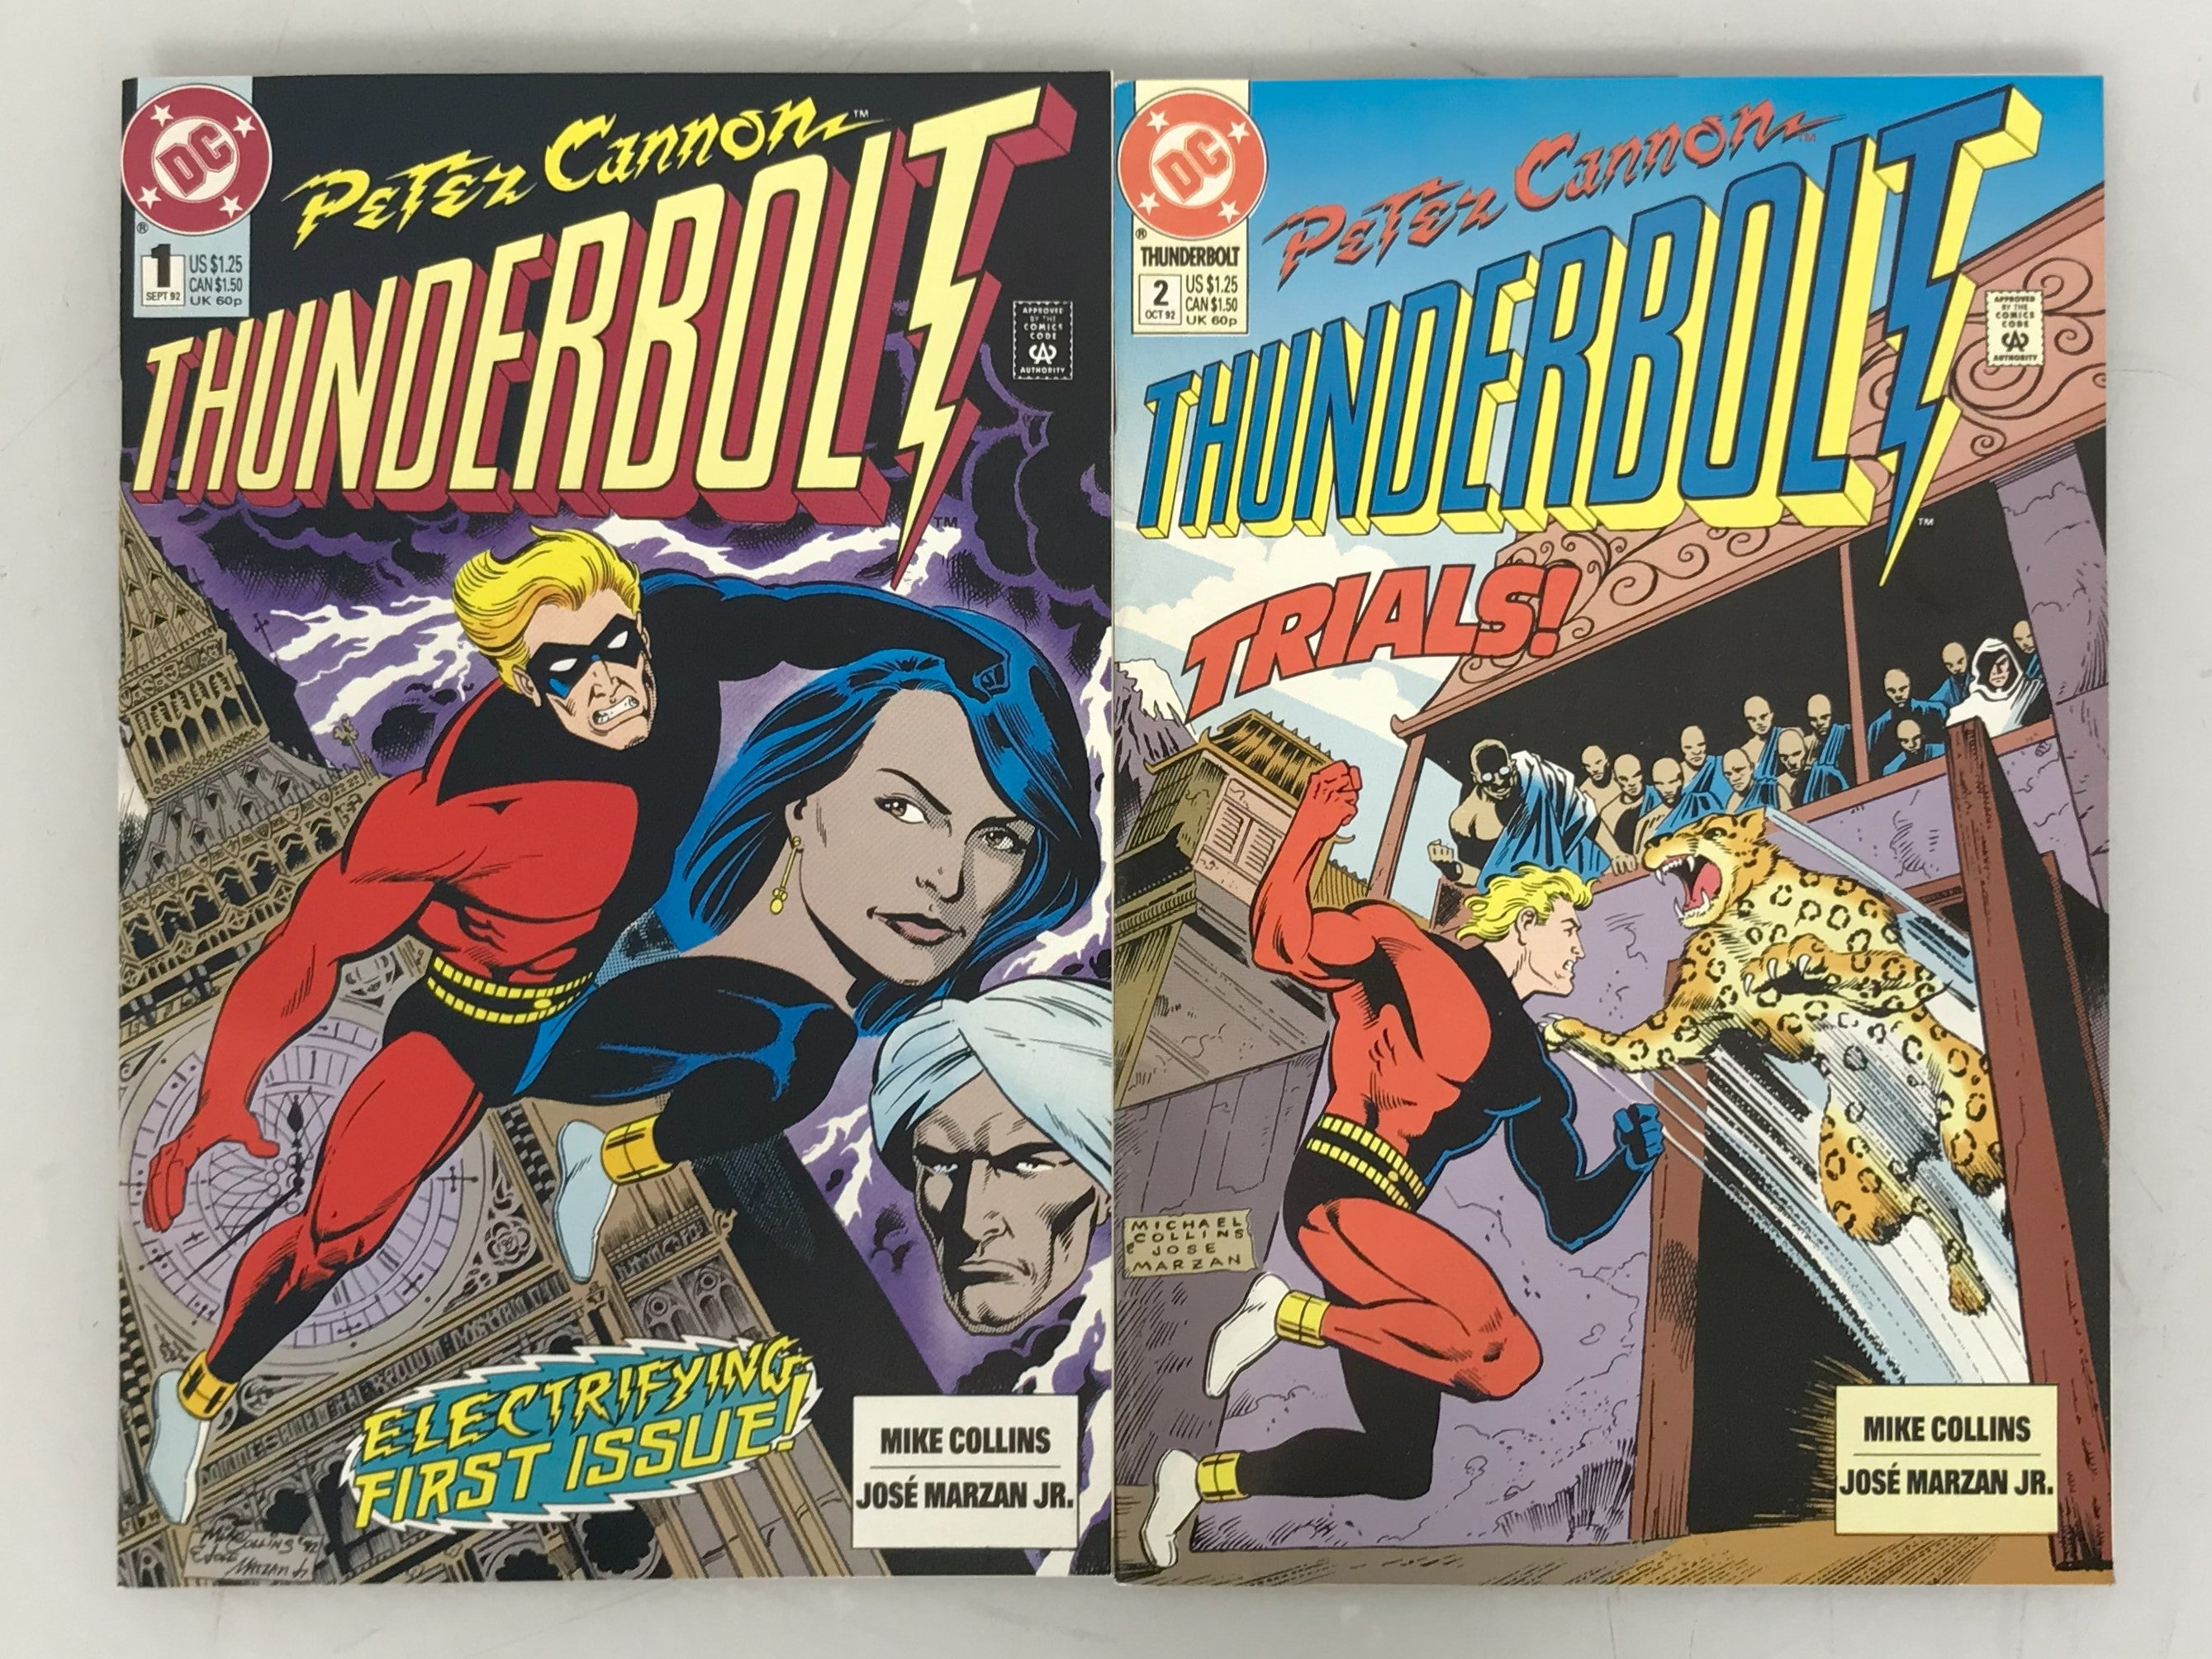 Peter Cannon- Thunderbolt 1-2 1992